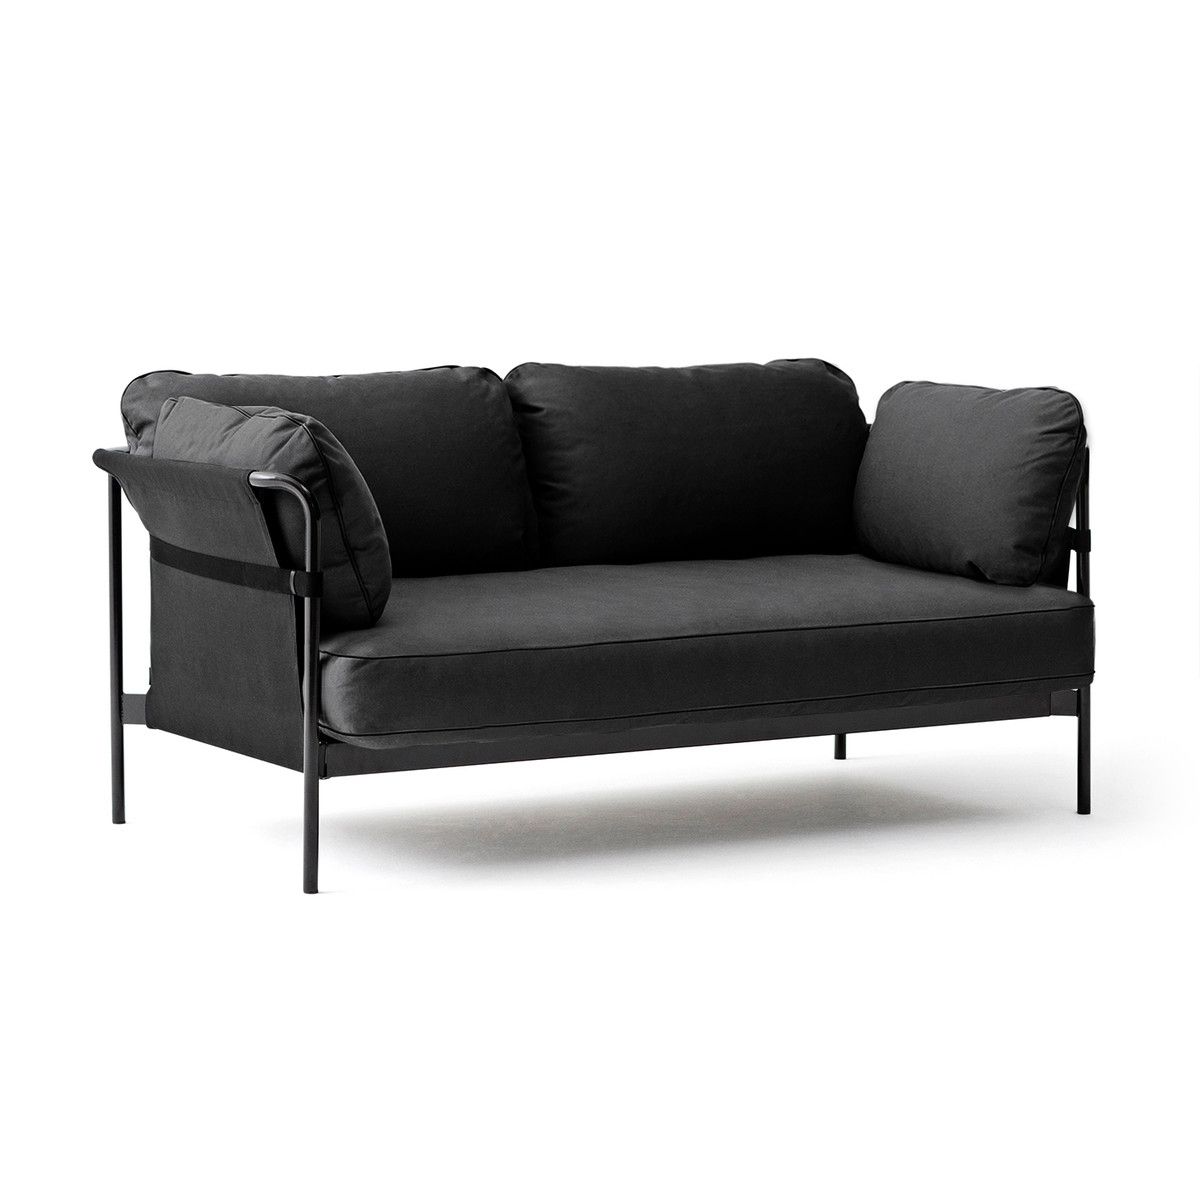 Black 2 Seater Sofas With Well Known Can 2 Seater Sofahay In Our Interior Design Shop (View 8 of 20)